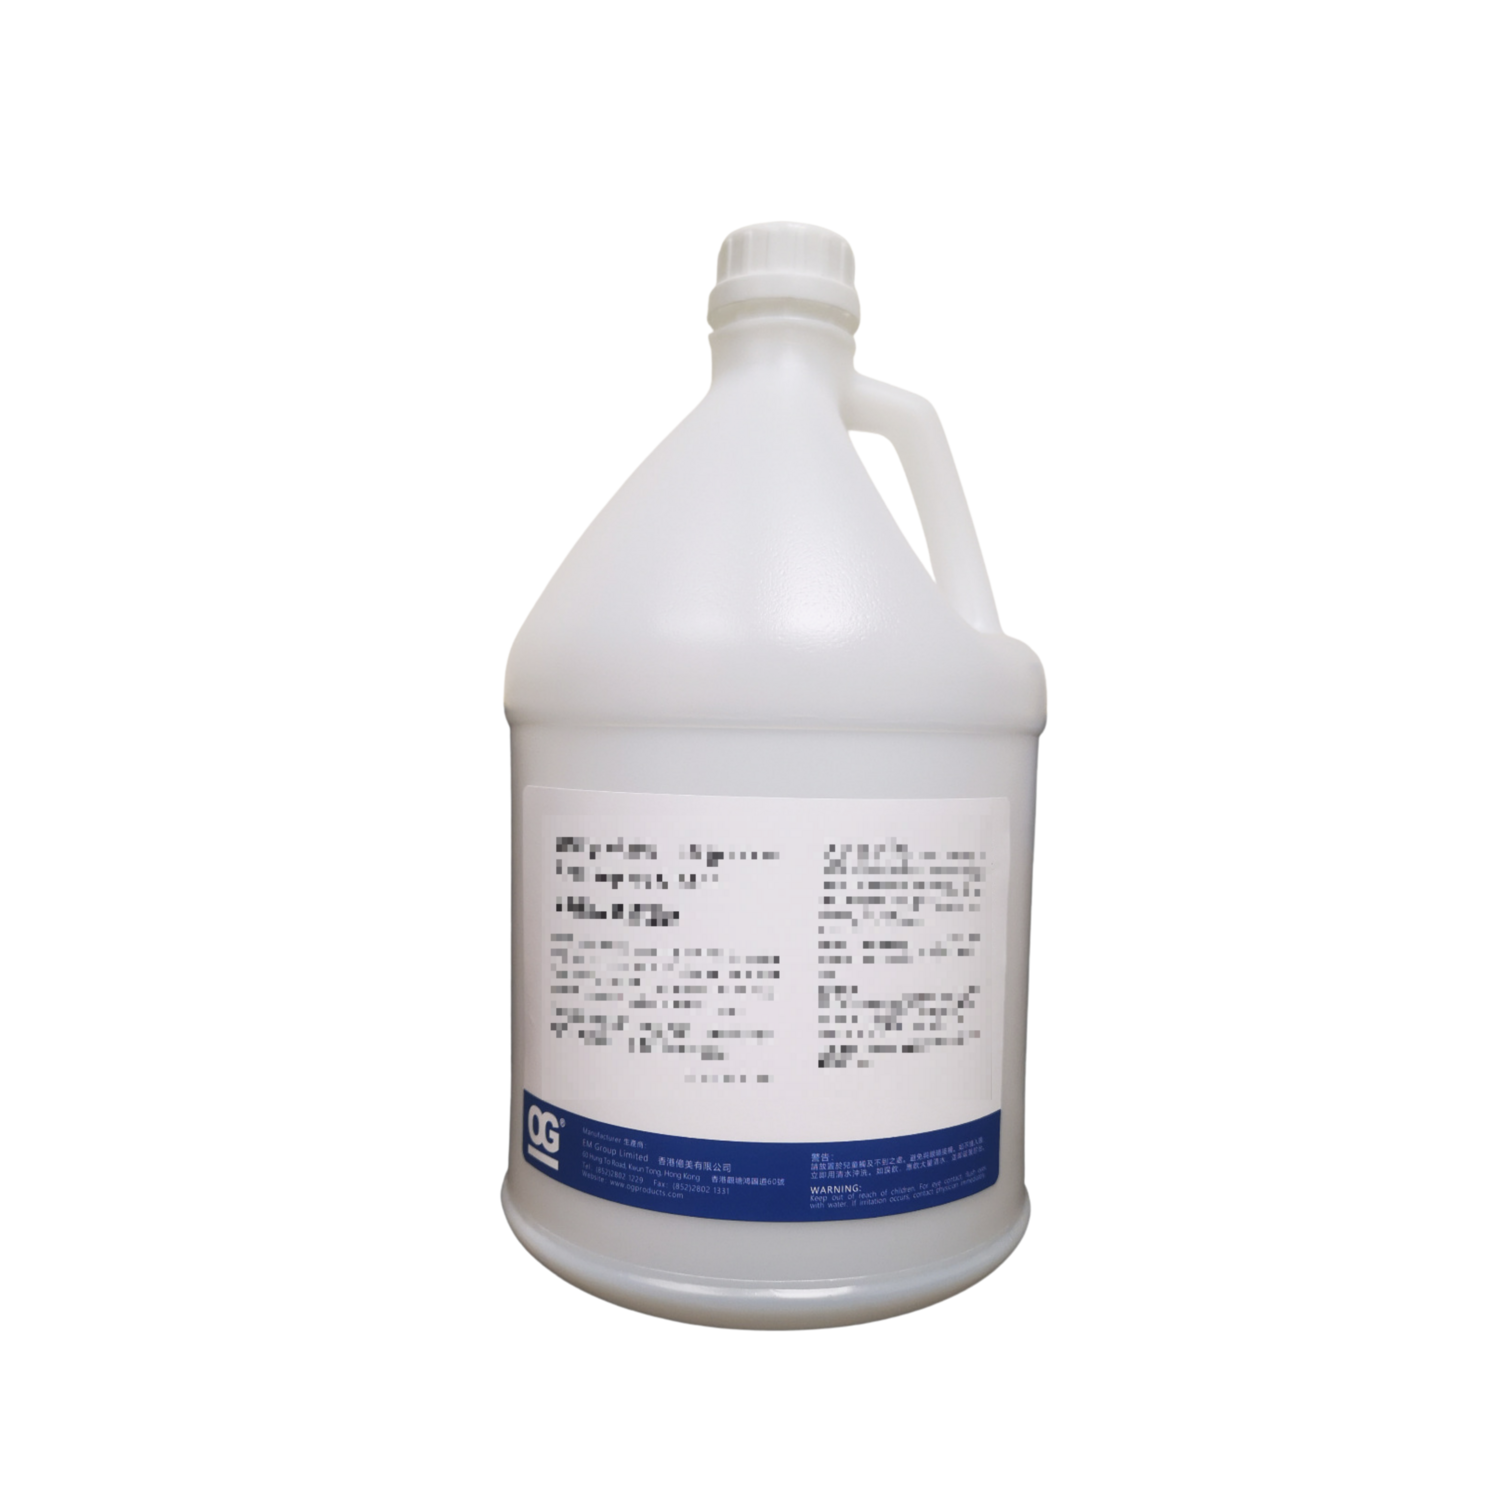 Biodegradable Degreaser & All Purpose Cleaner - 1Gal